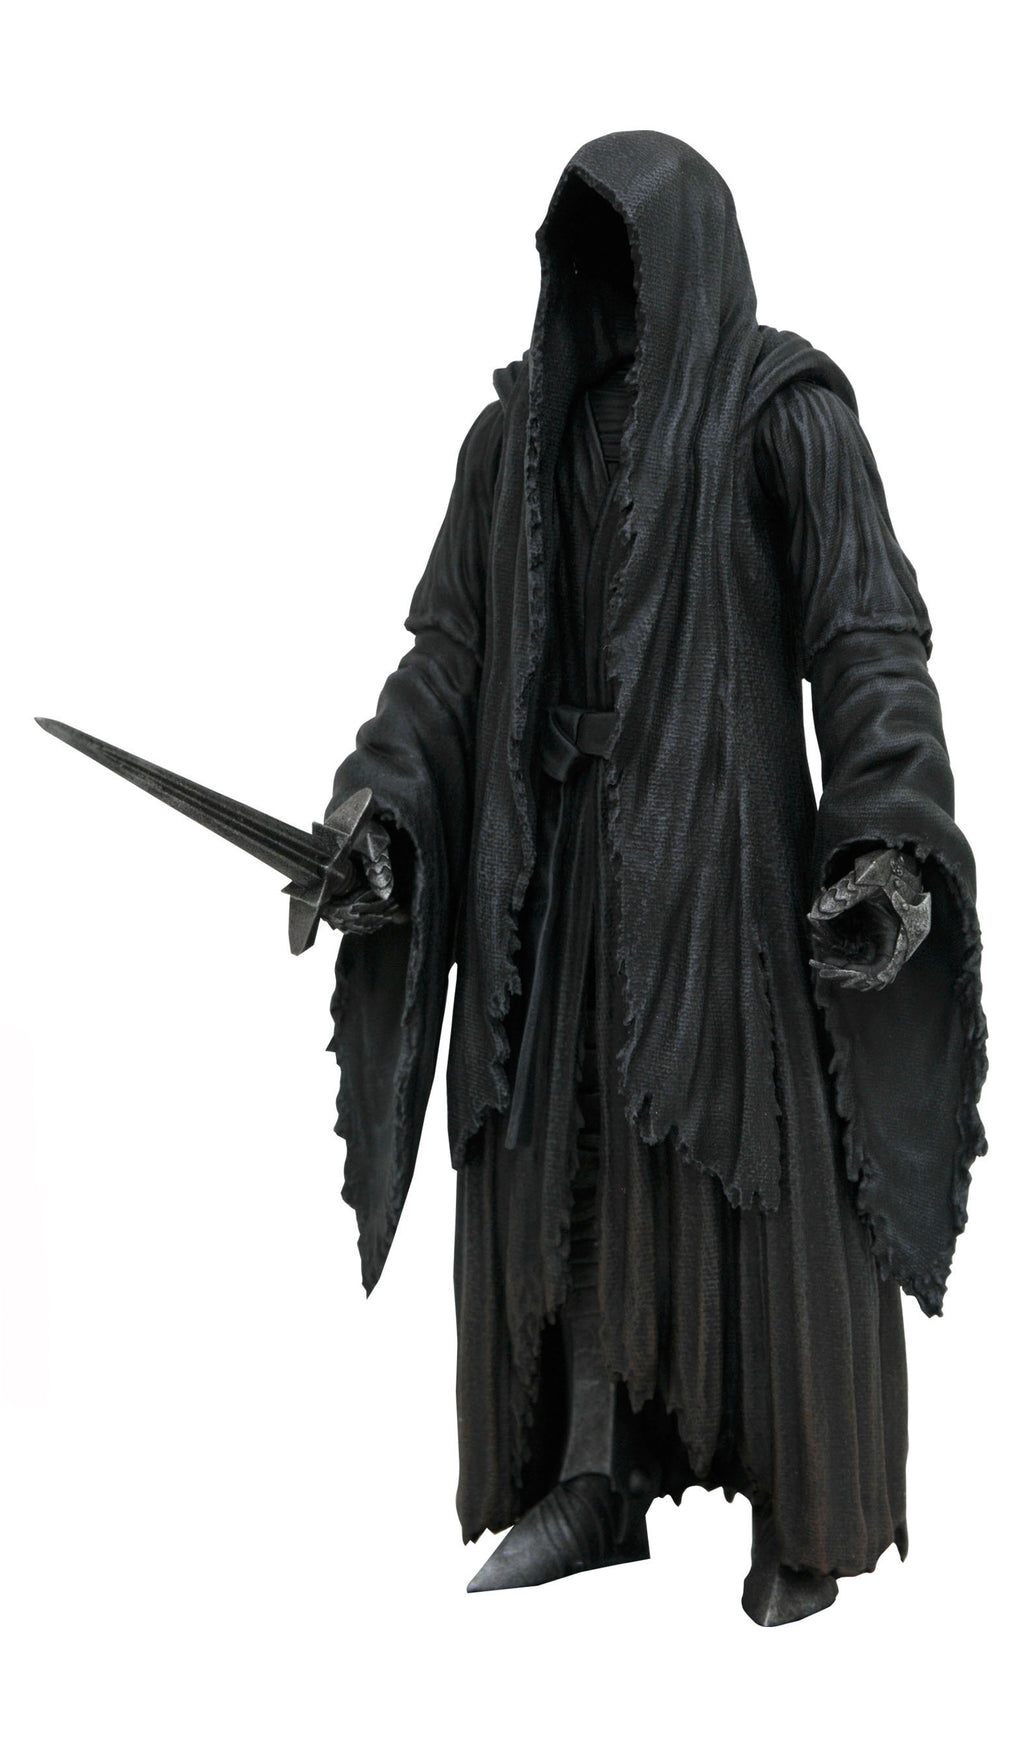 LORD OF THE RINGS SERIES 2 RINGWAITH 7" ACTION FIGURE